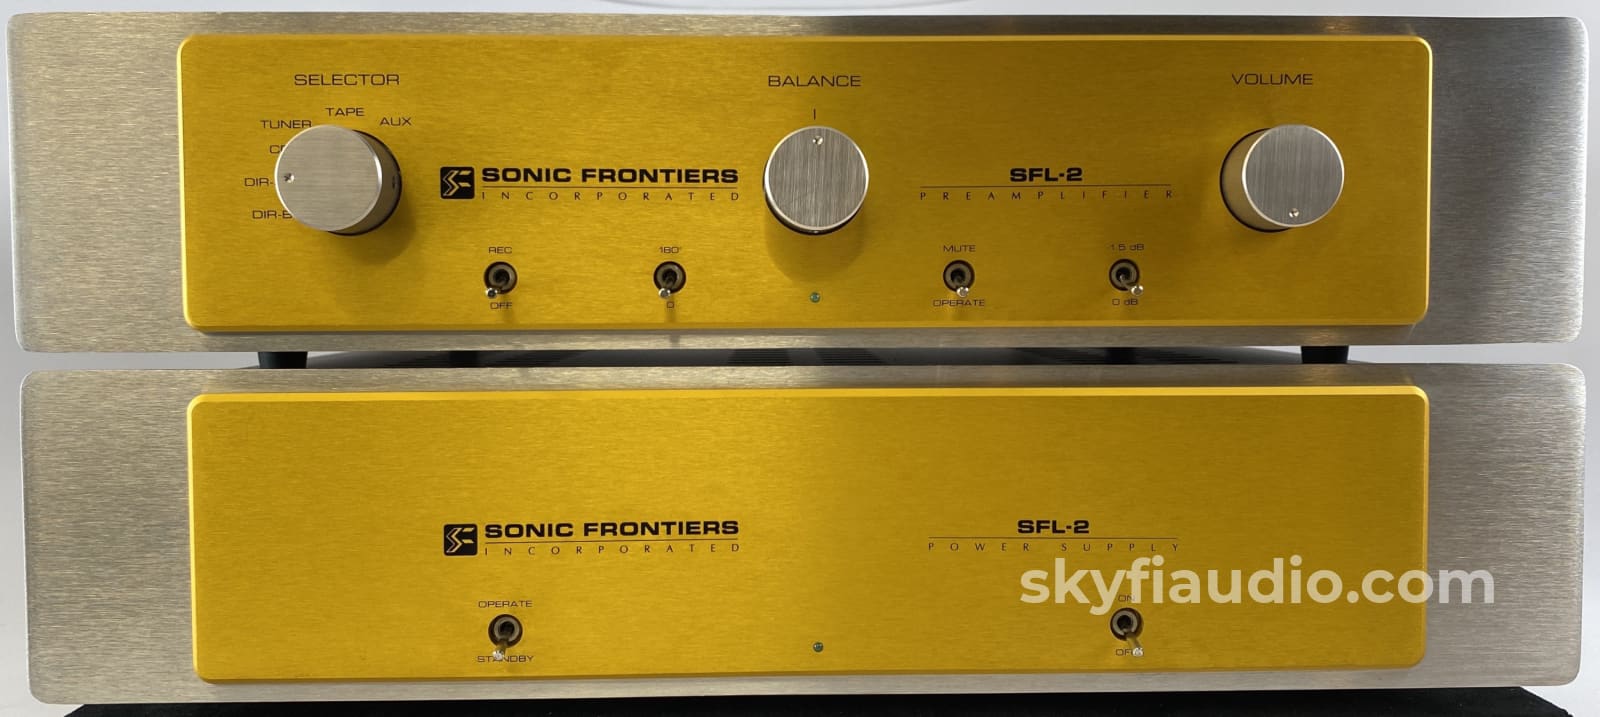 Sonic Frontiers Sfl-2 - All Tube Dual-Chassis Preamp Preamplifier